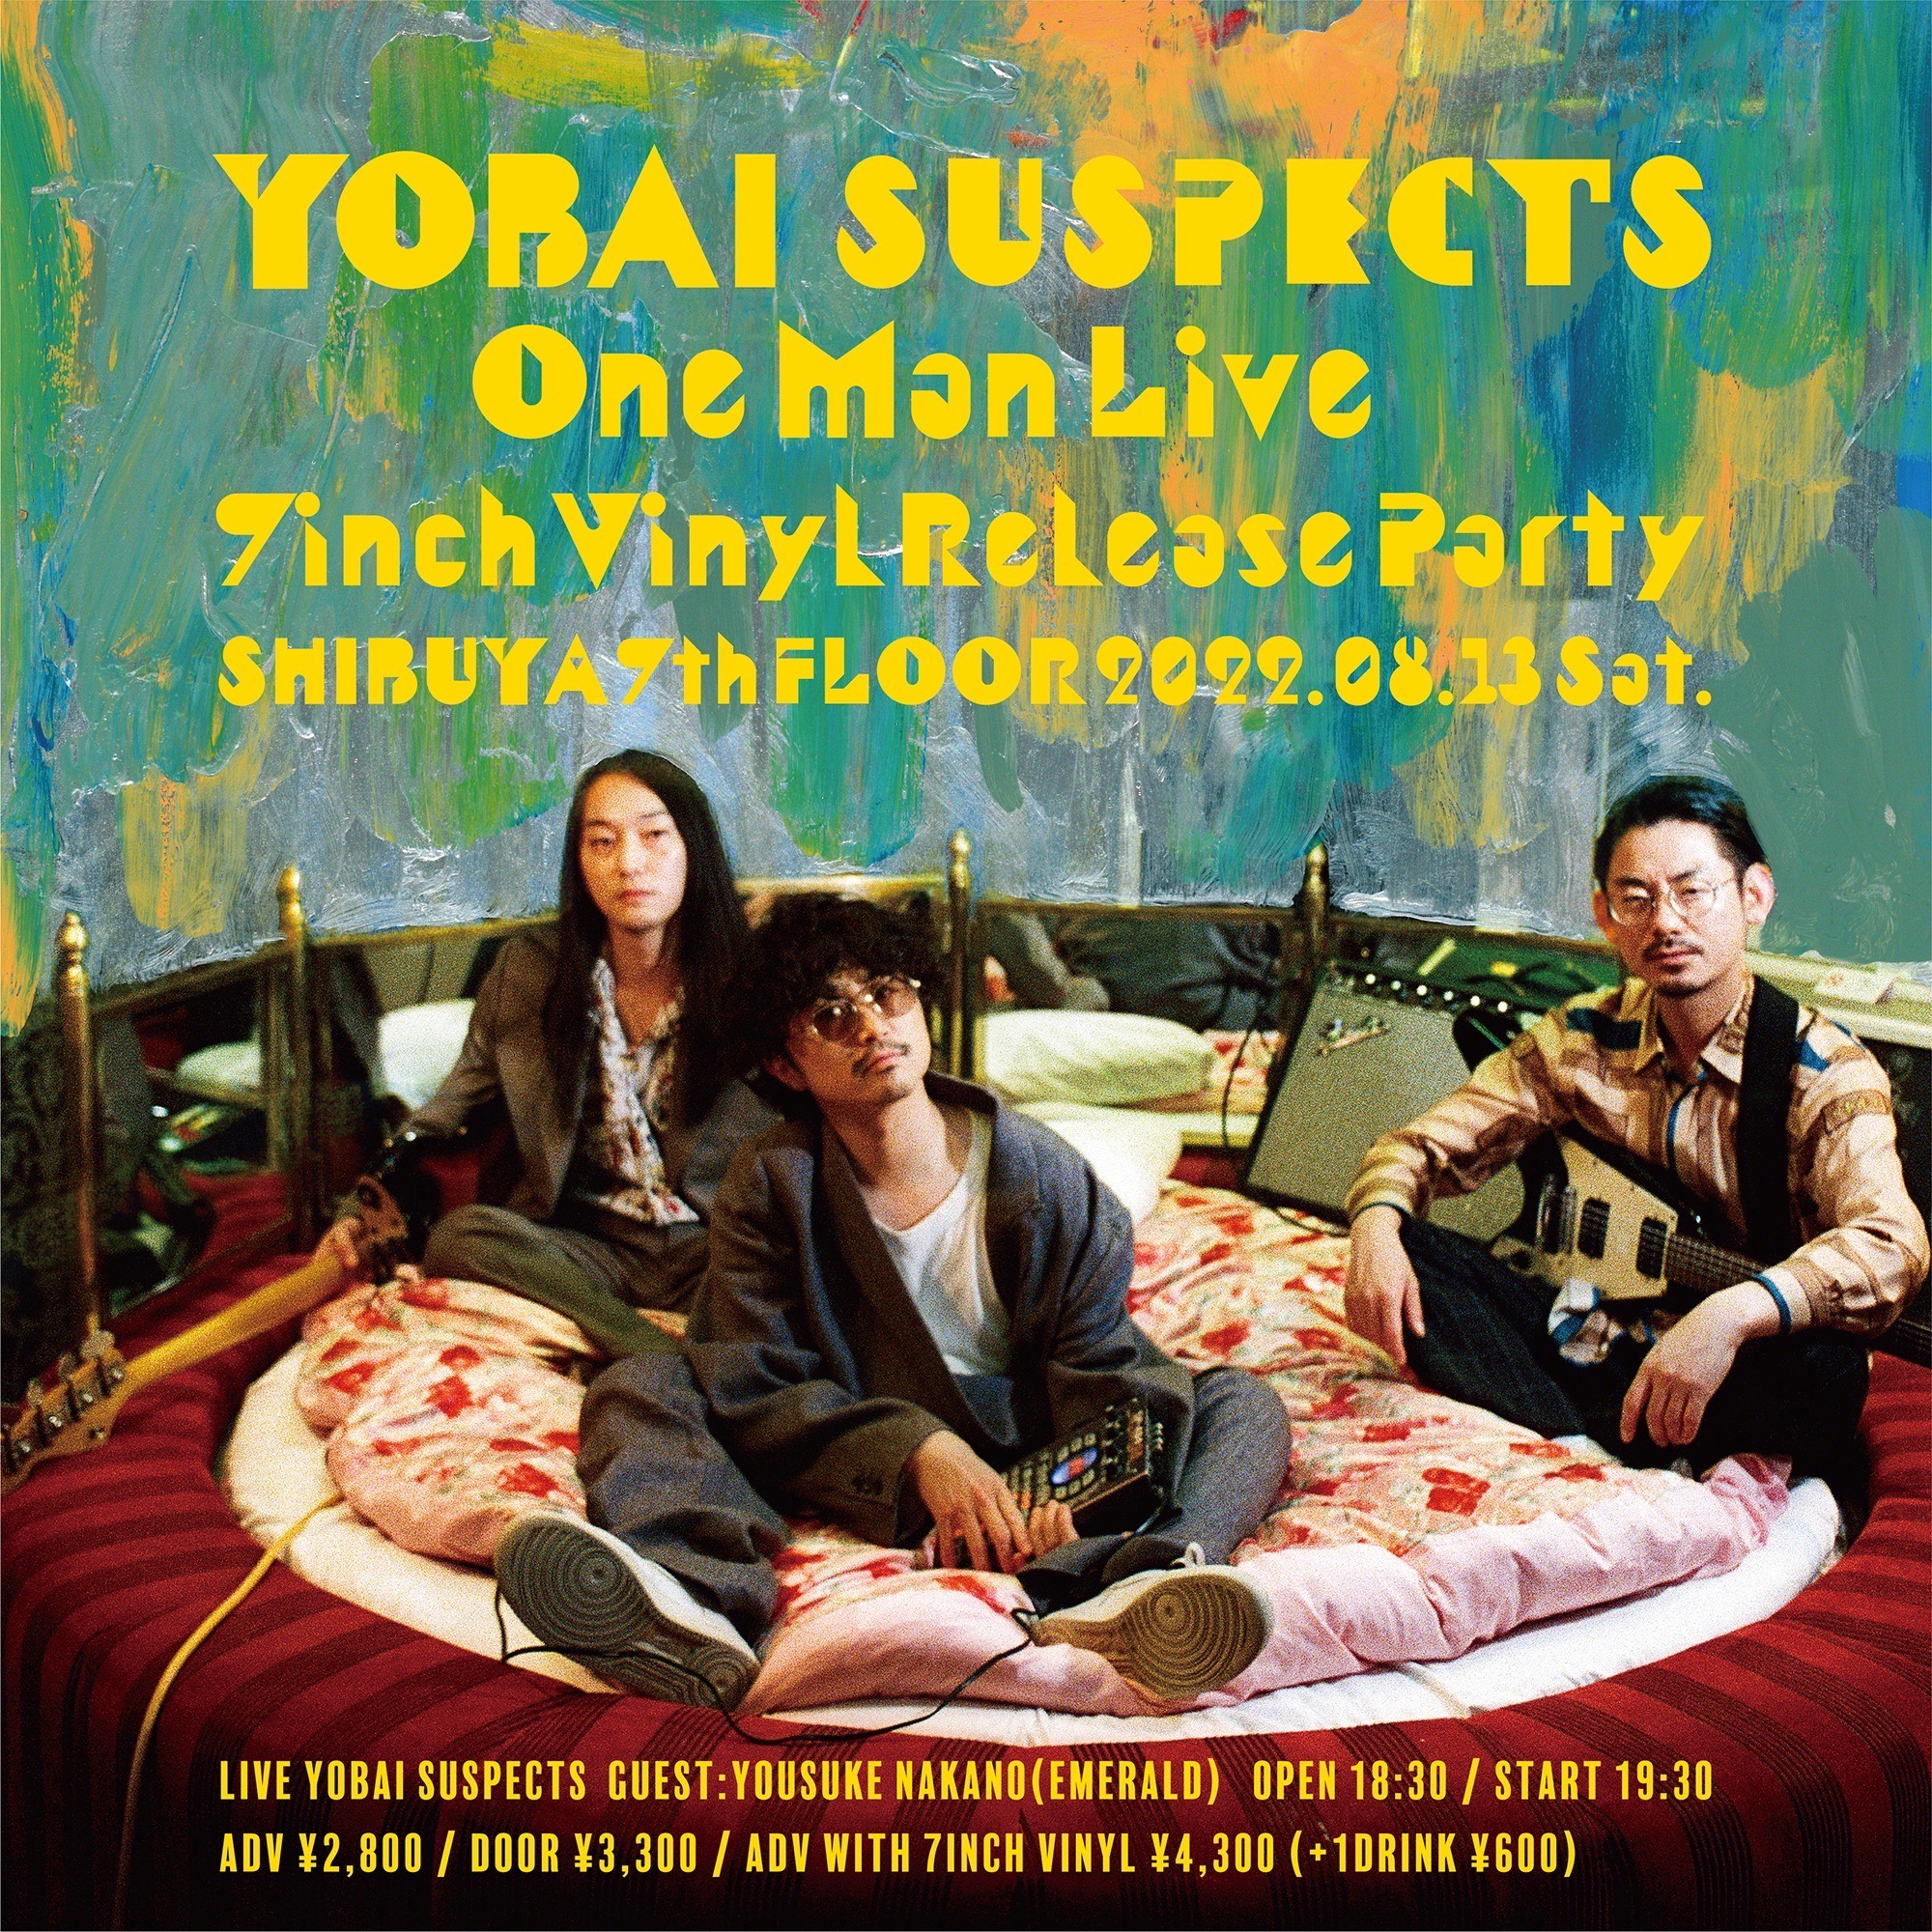 yobai suspects One Man Live  　 　-7inch Vinyl Release Party-